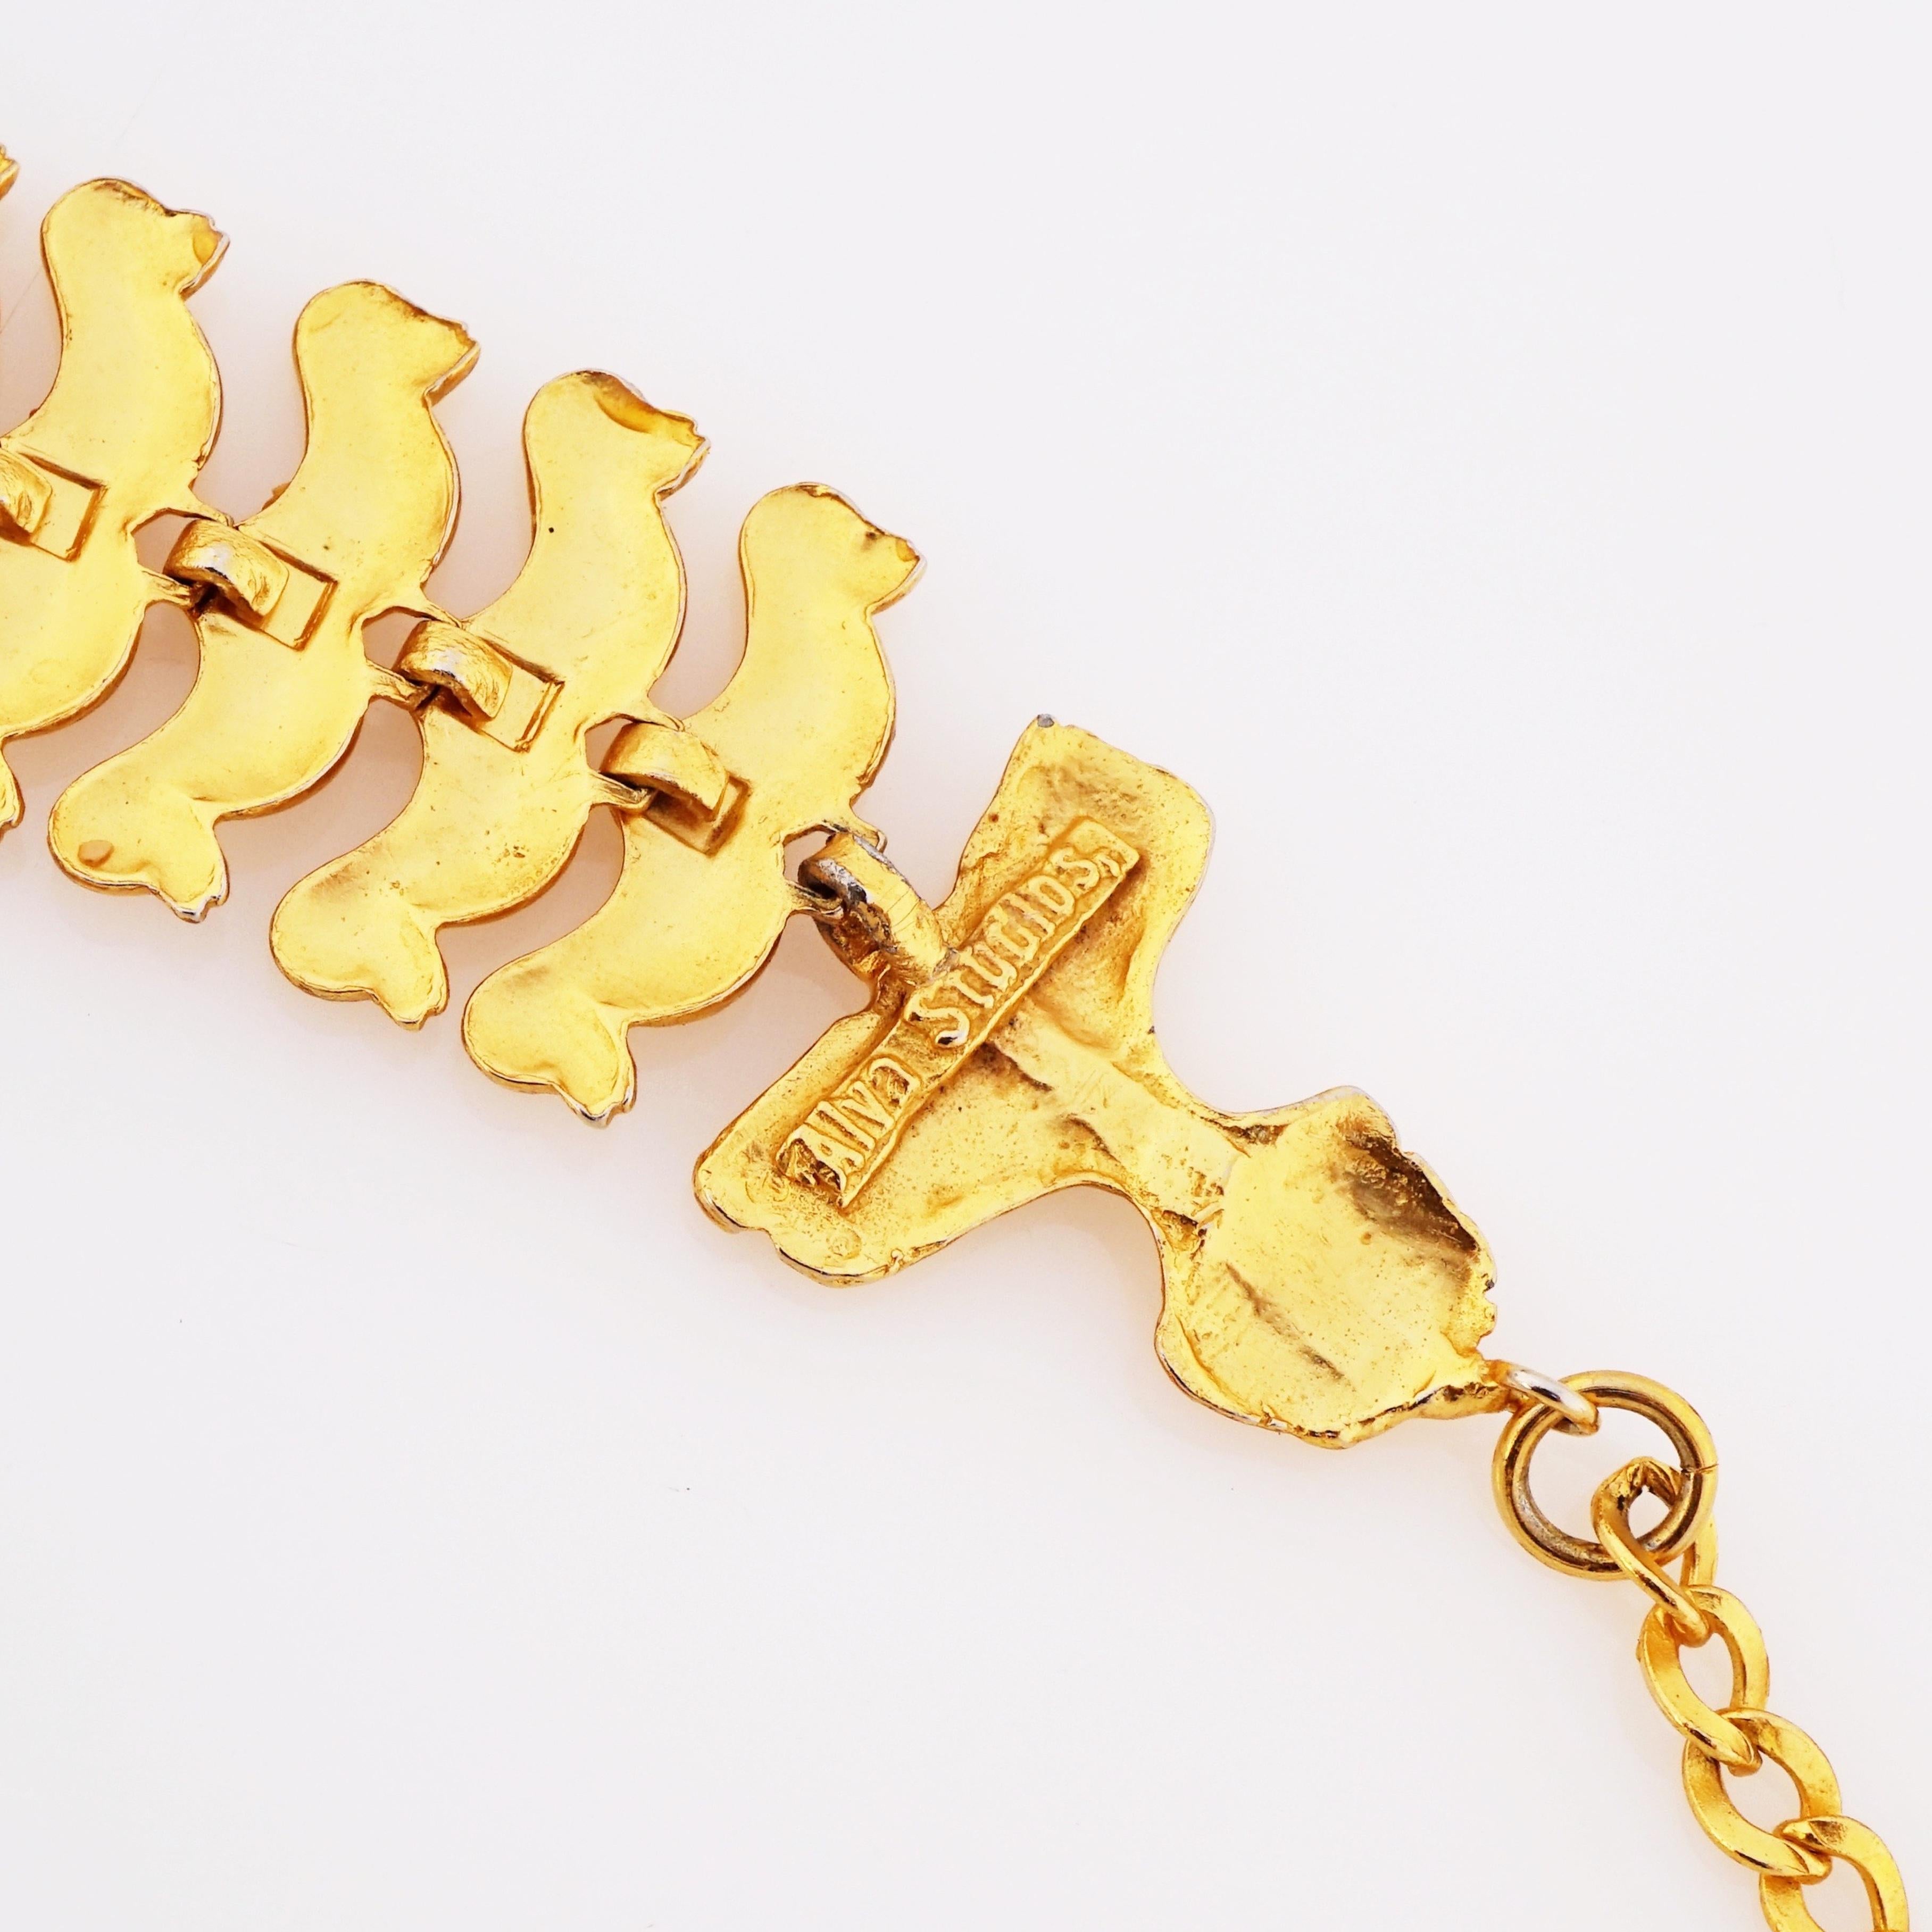 Modern Egyptian Revival Mirrored Duck Link Necklace By Alva Studios, 1960s